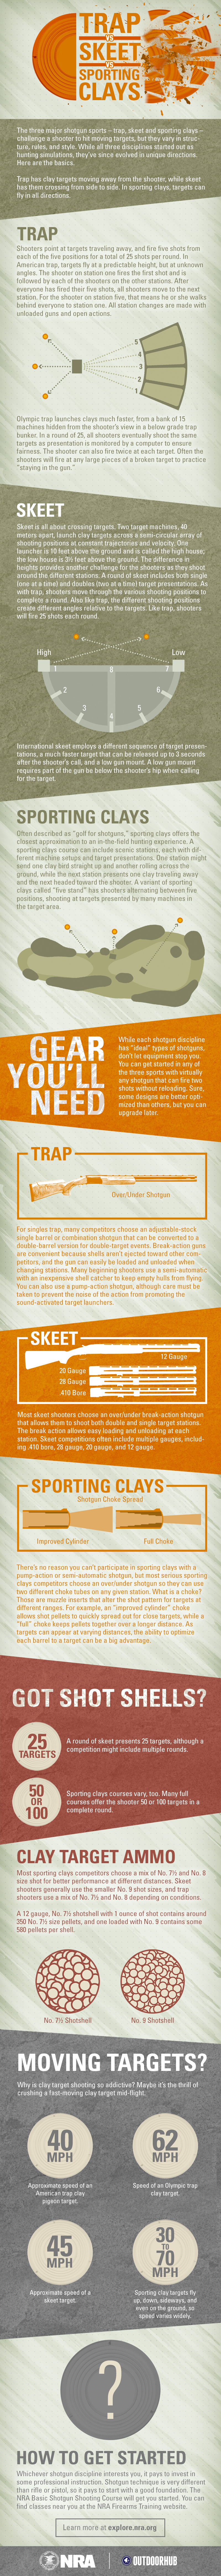 trapskeetclay_infographic